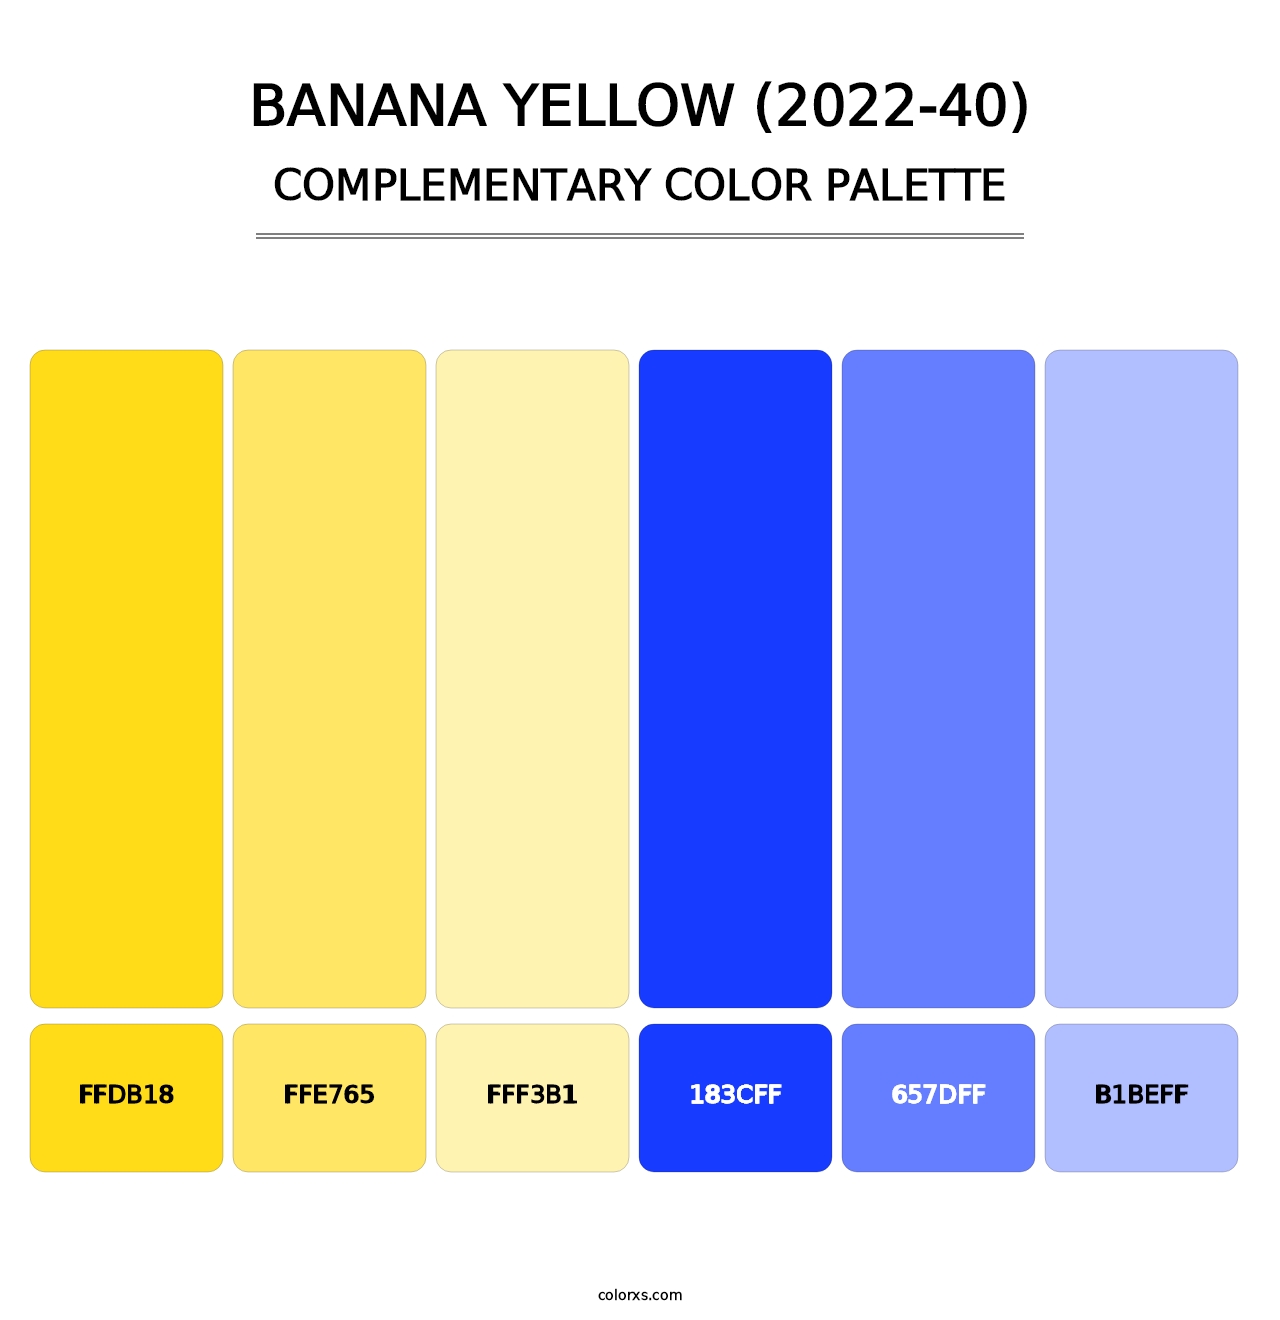 Banana Yellow (2022-40) - Complementary Color Palette